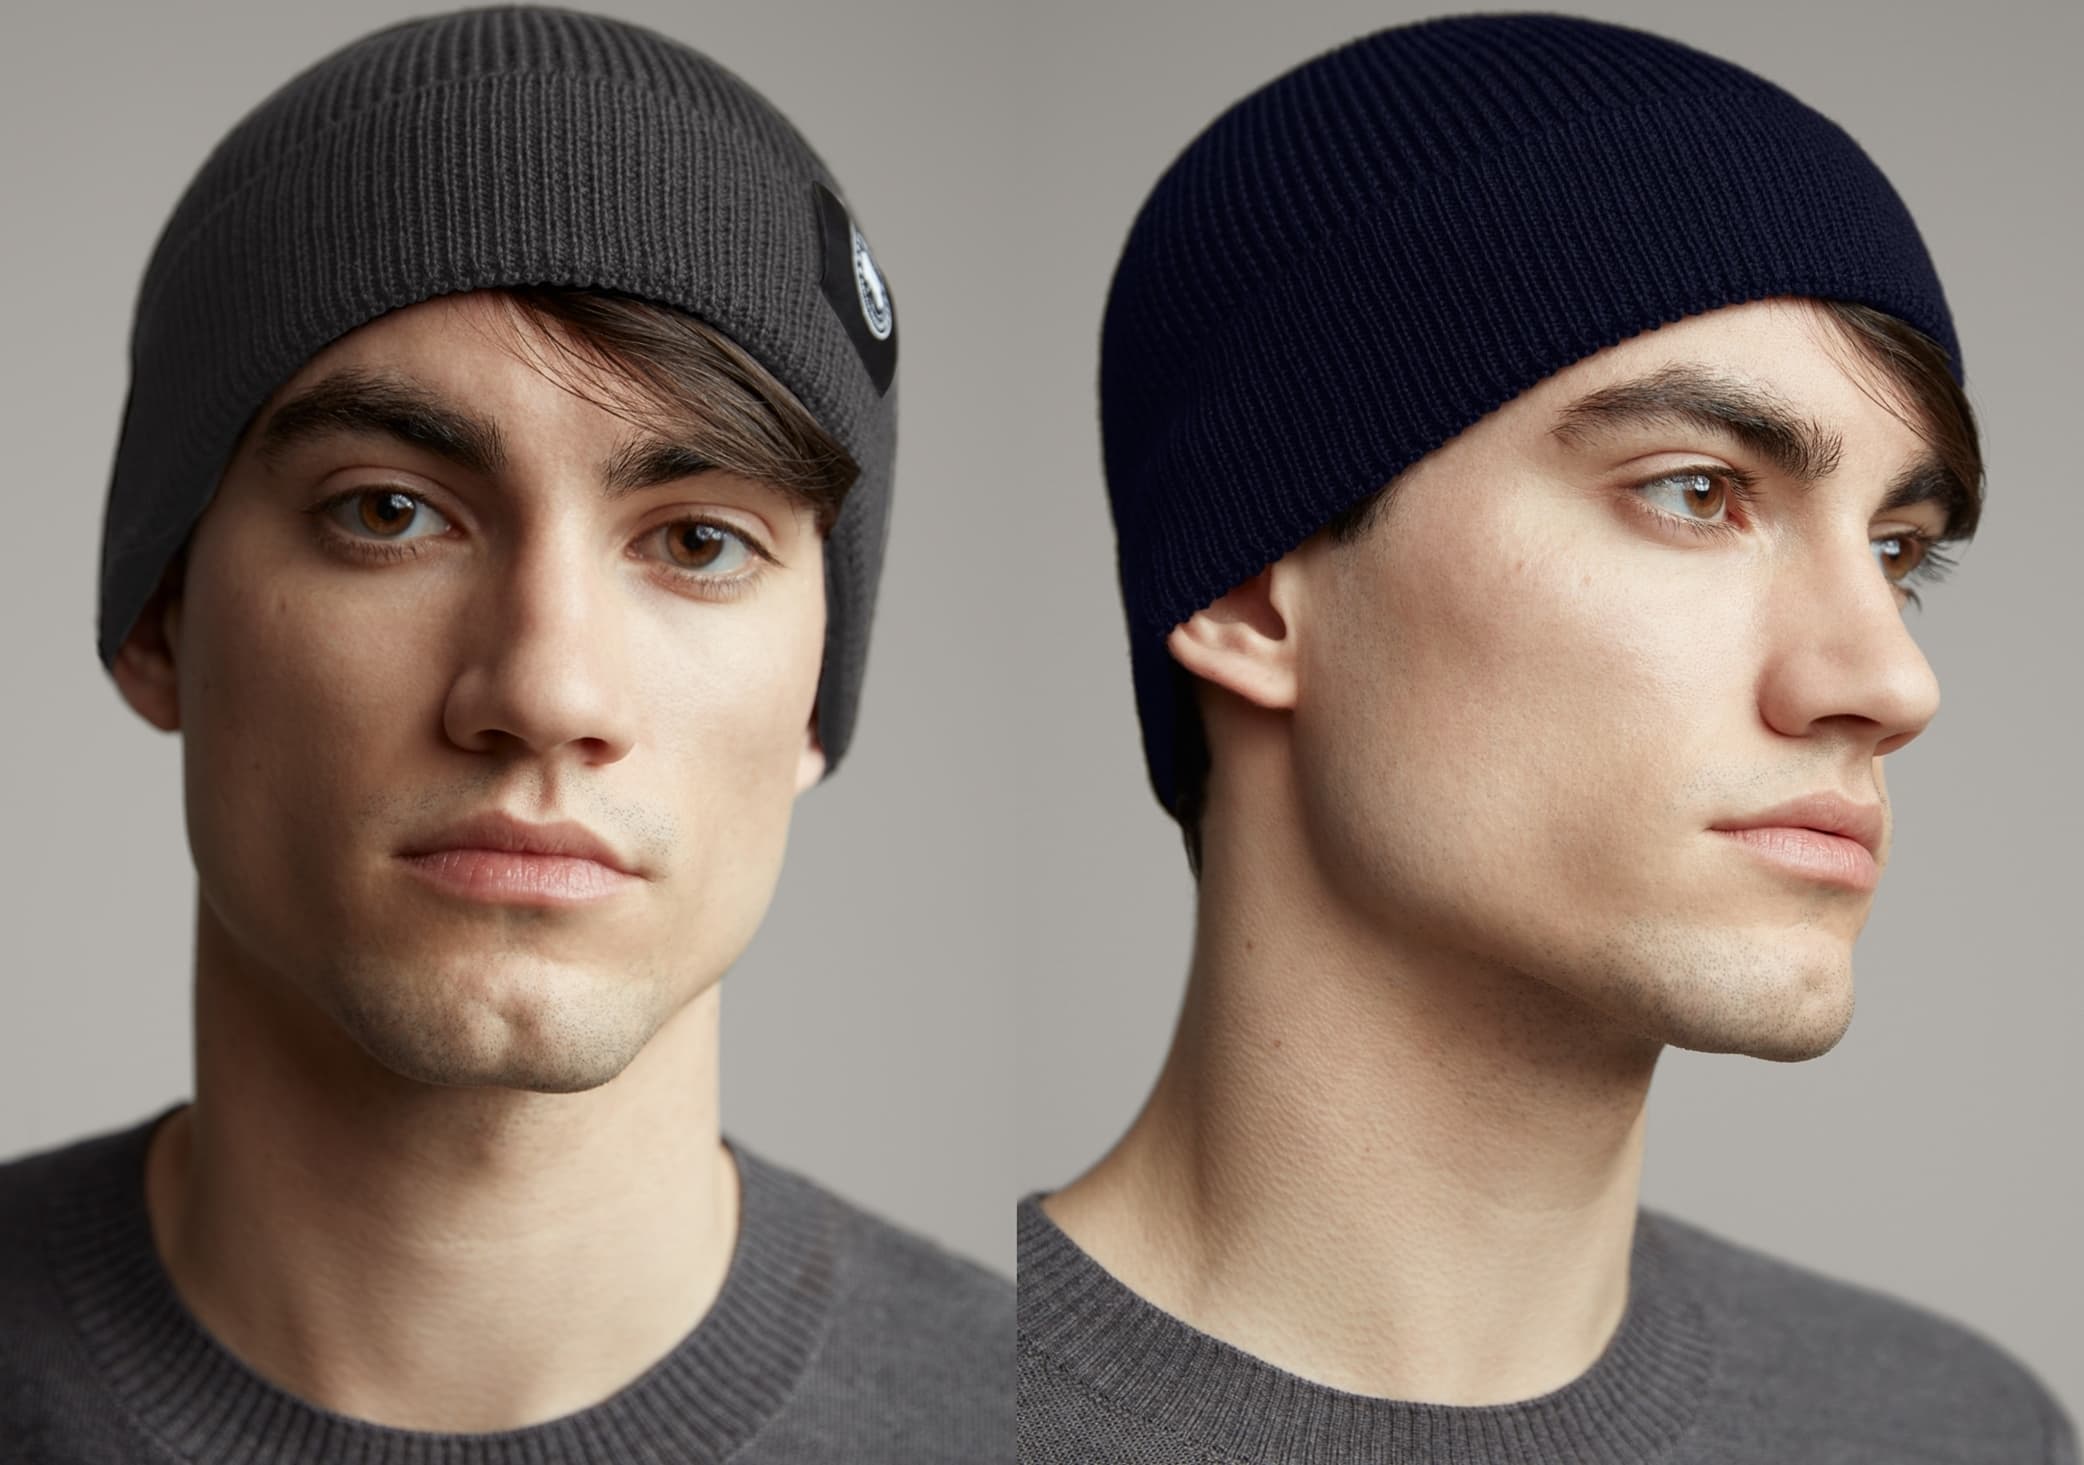 This wool cap this style is designed to have a light look and feel without compromising warmth